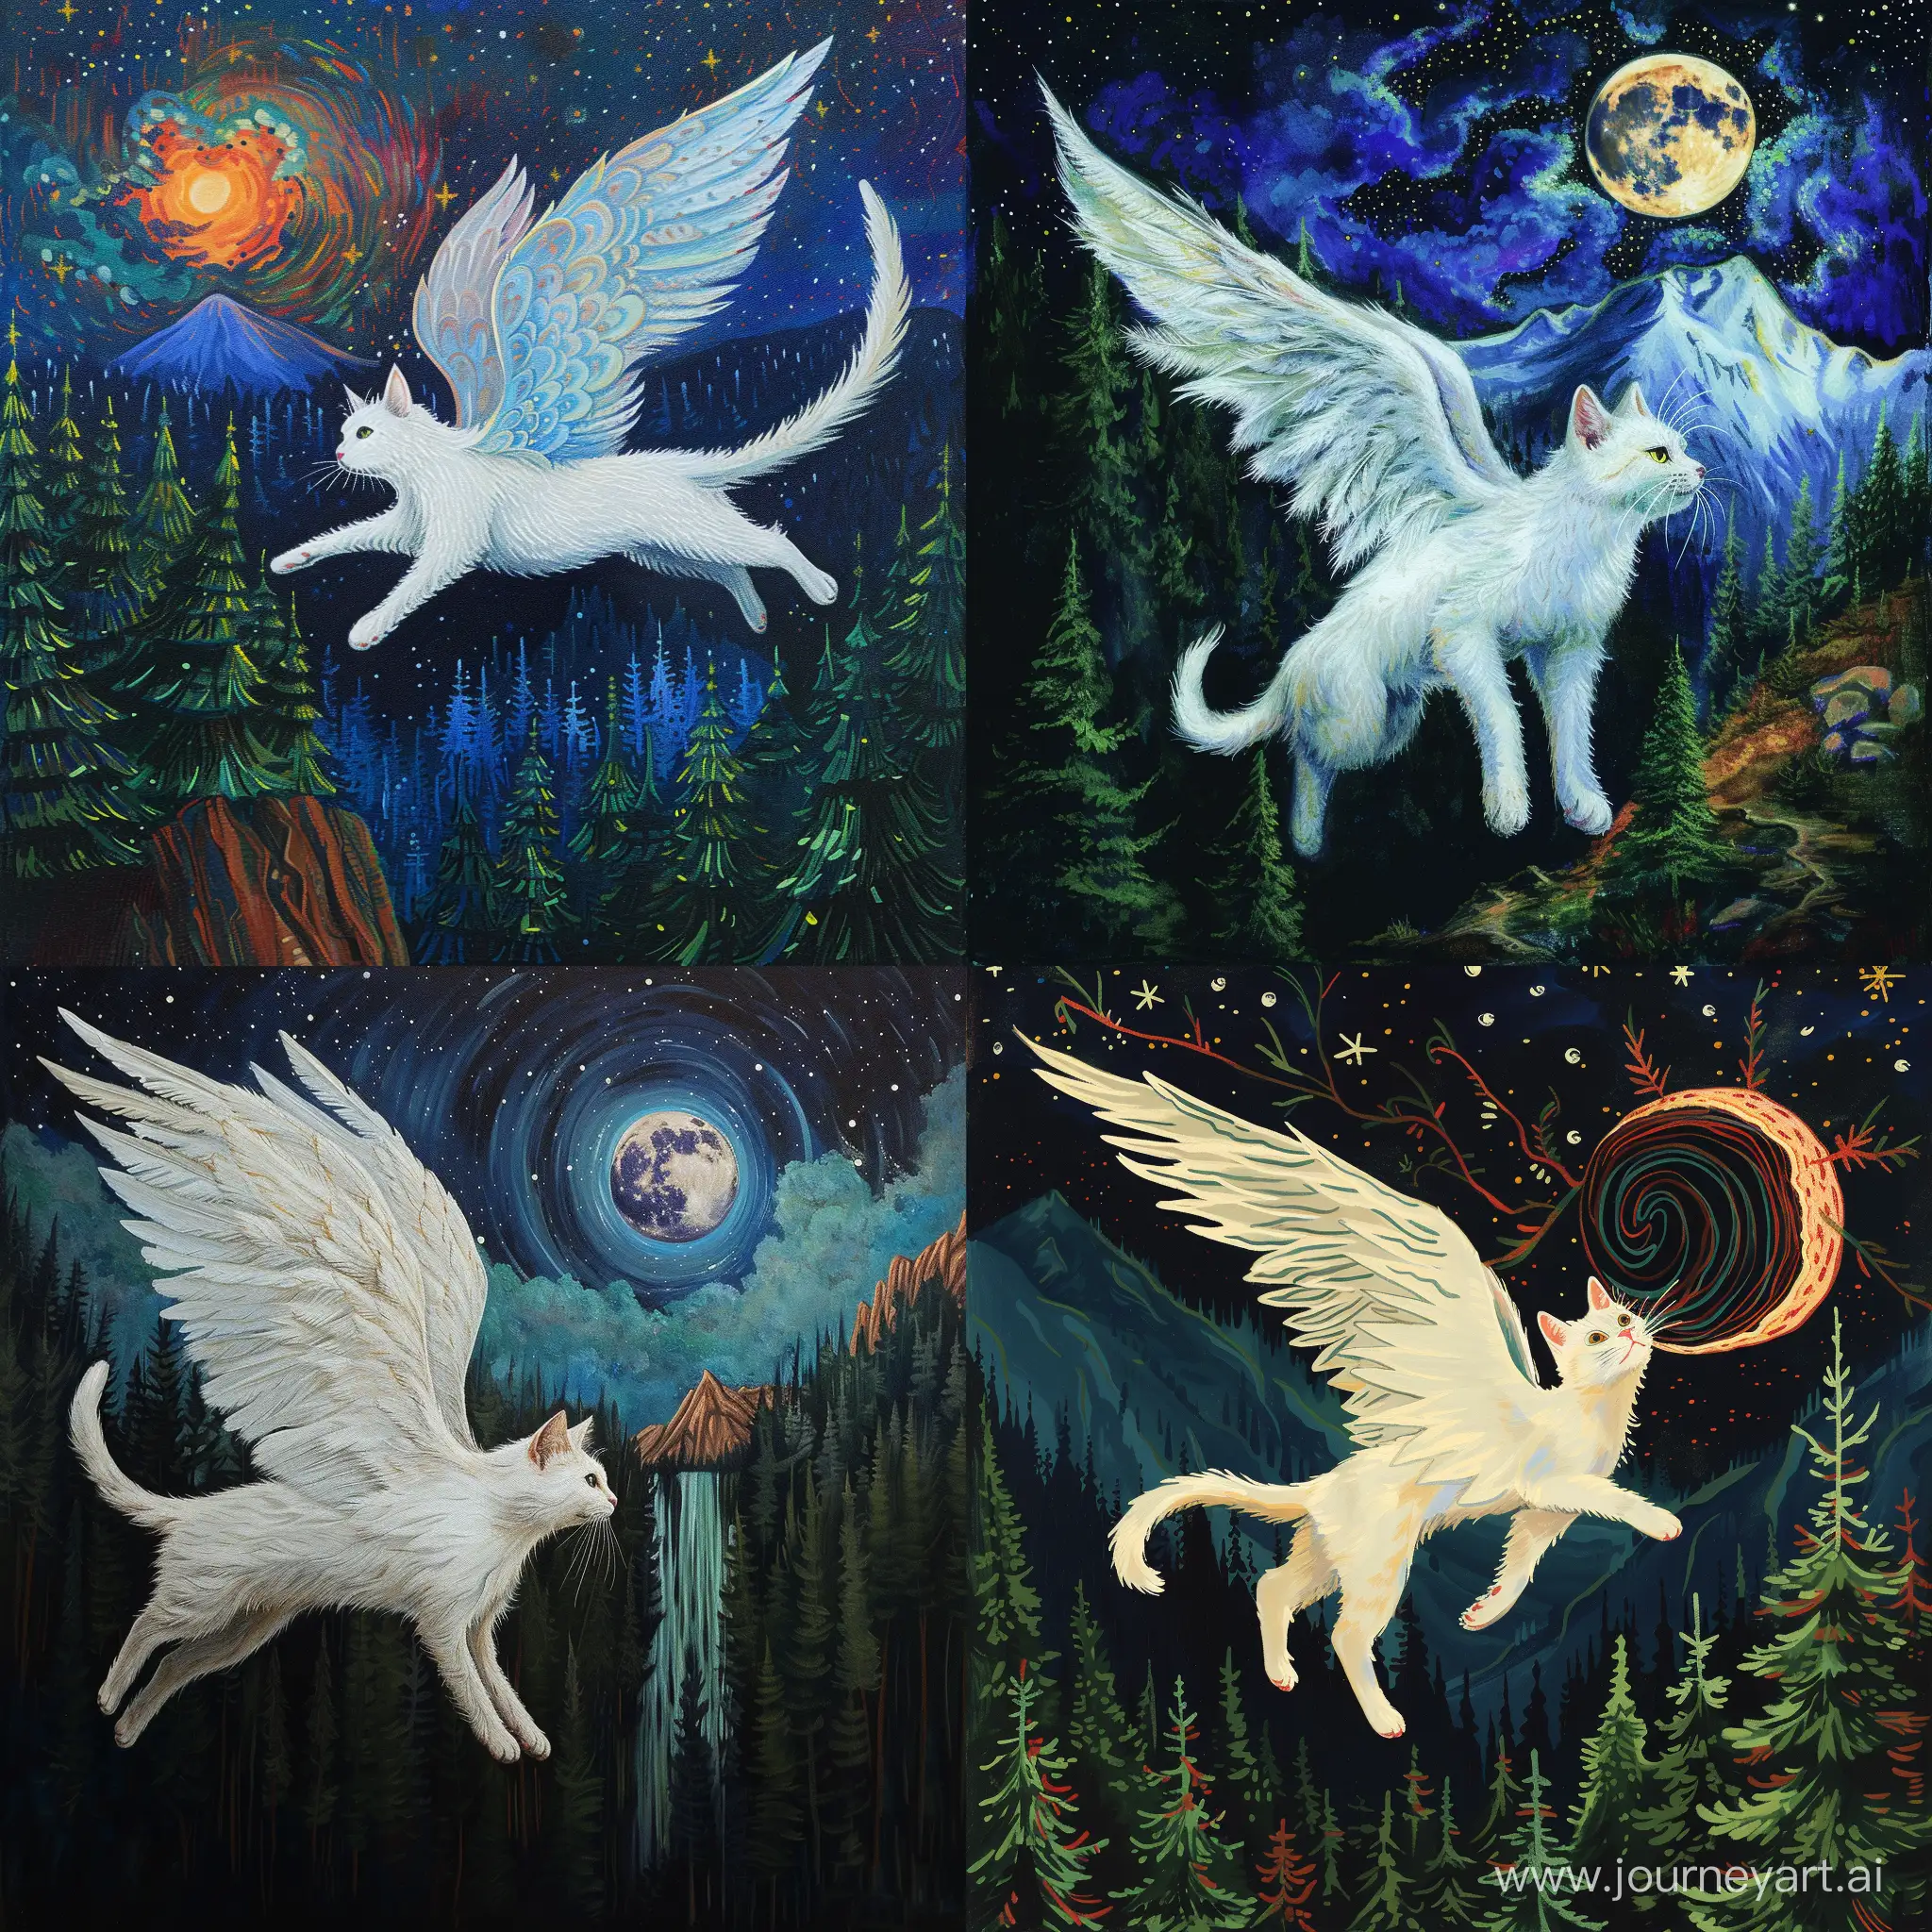 Majestic-Winged-White-Cat-Soaring-Through-Enchanted-Starlit-Forest